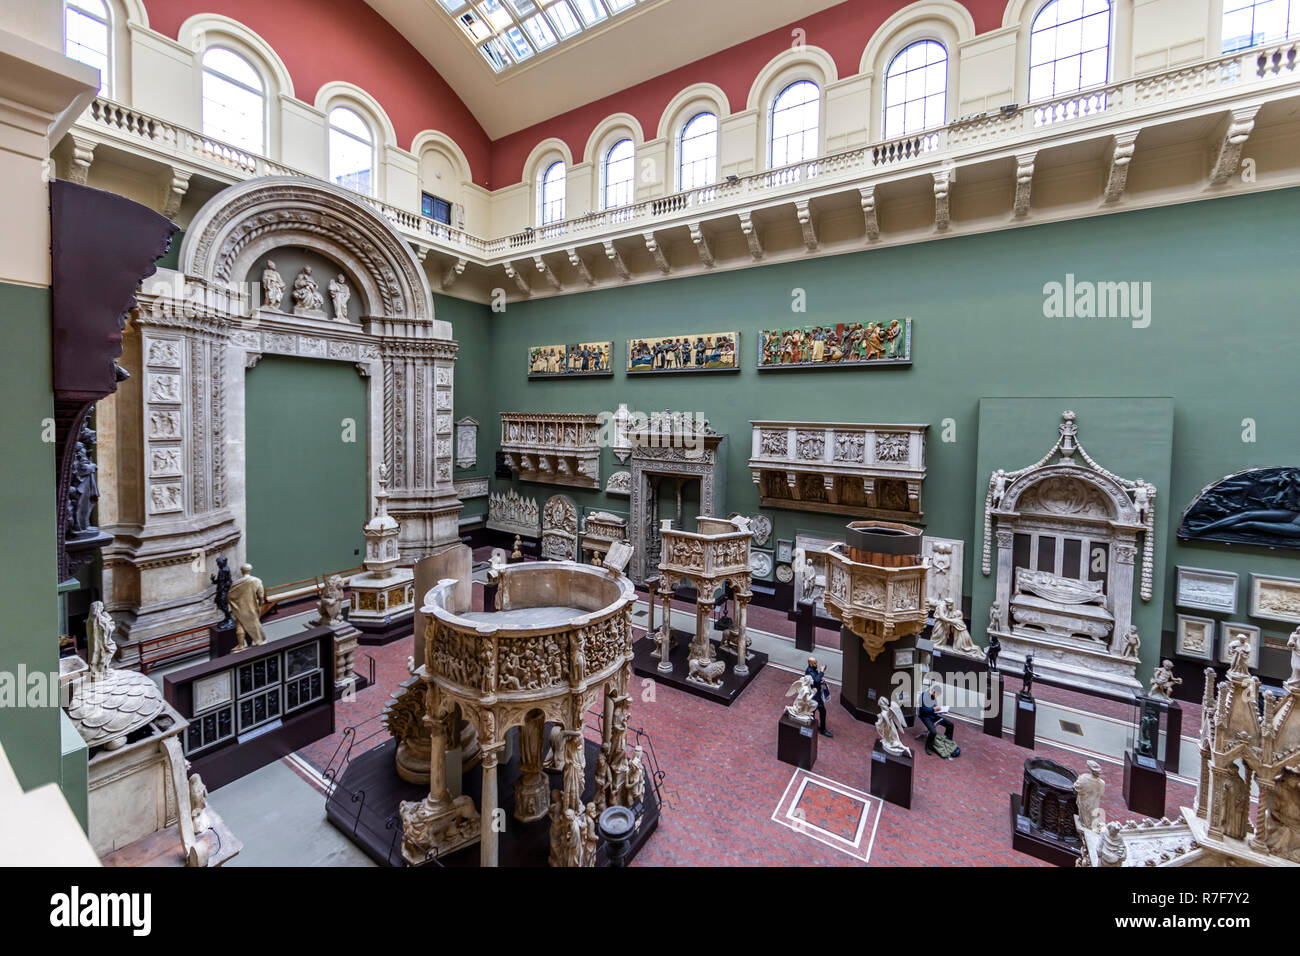 Masterpieces in Plaster: Inside the V&A Museum